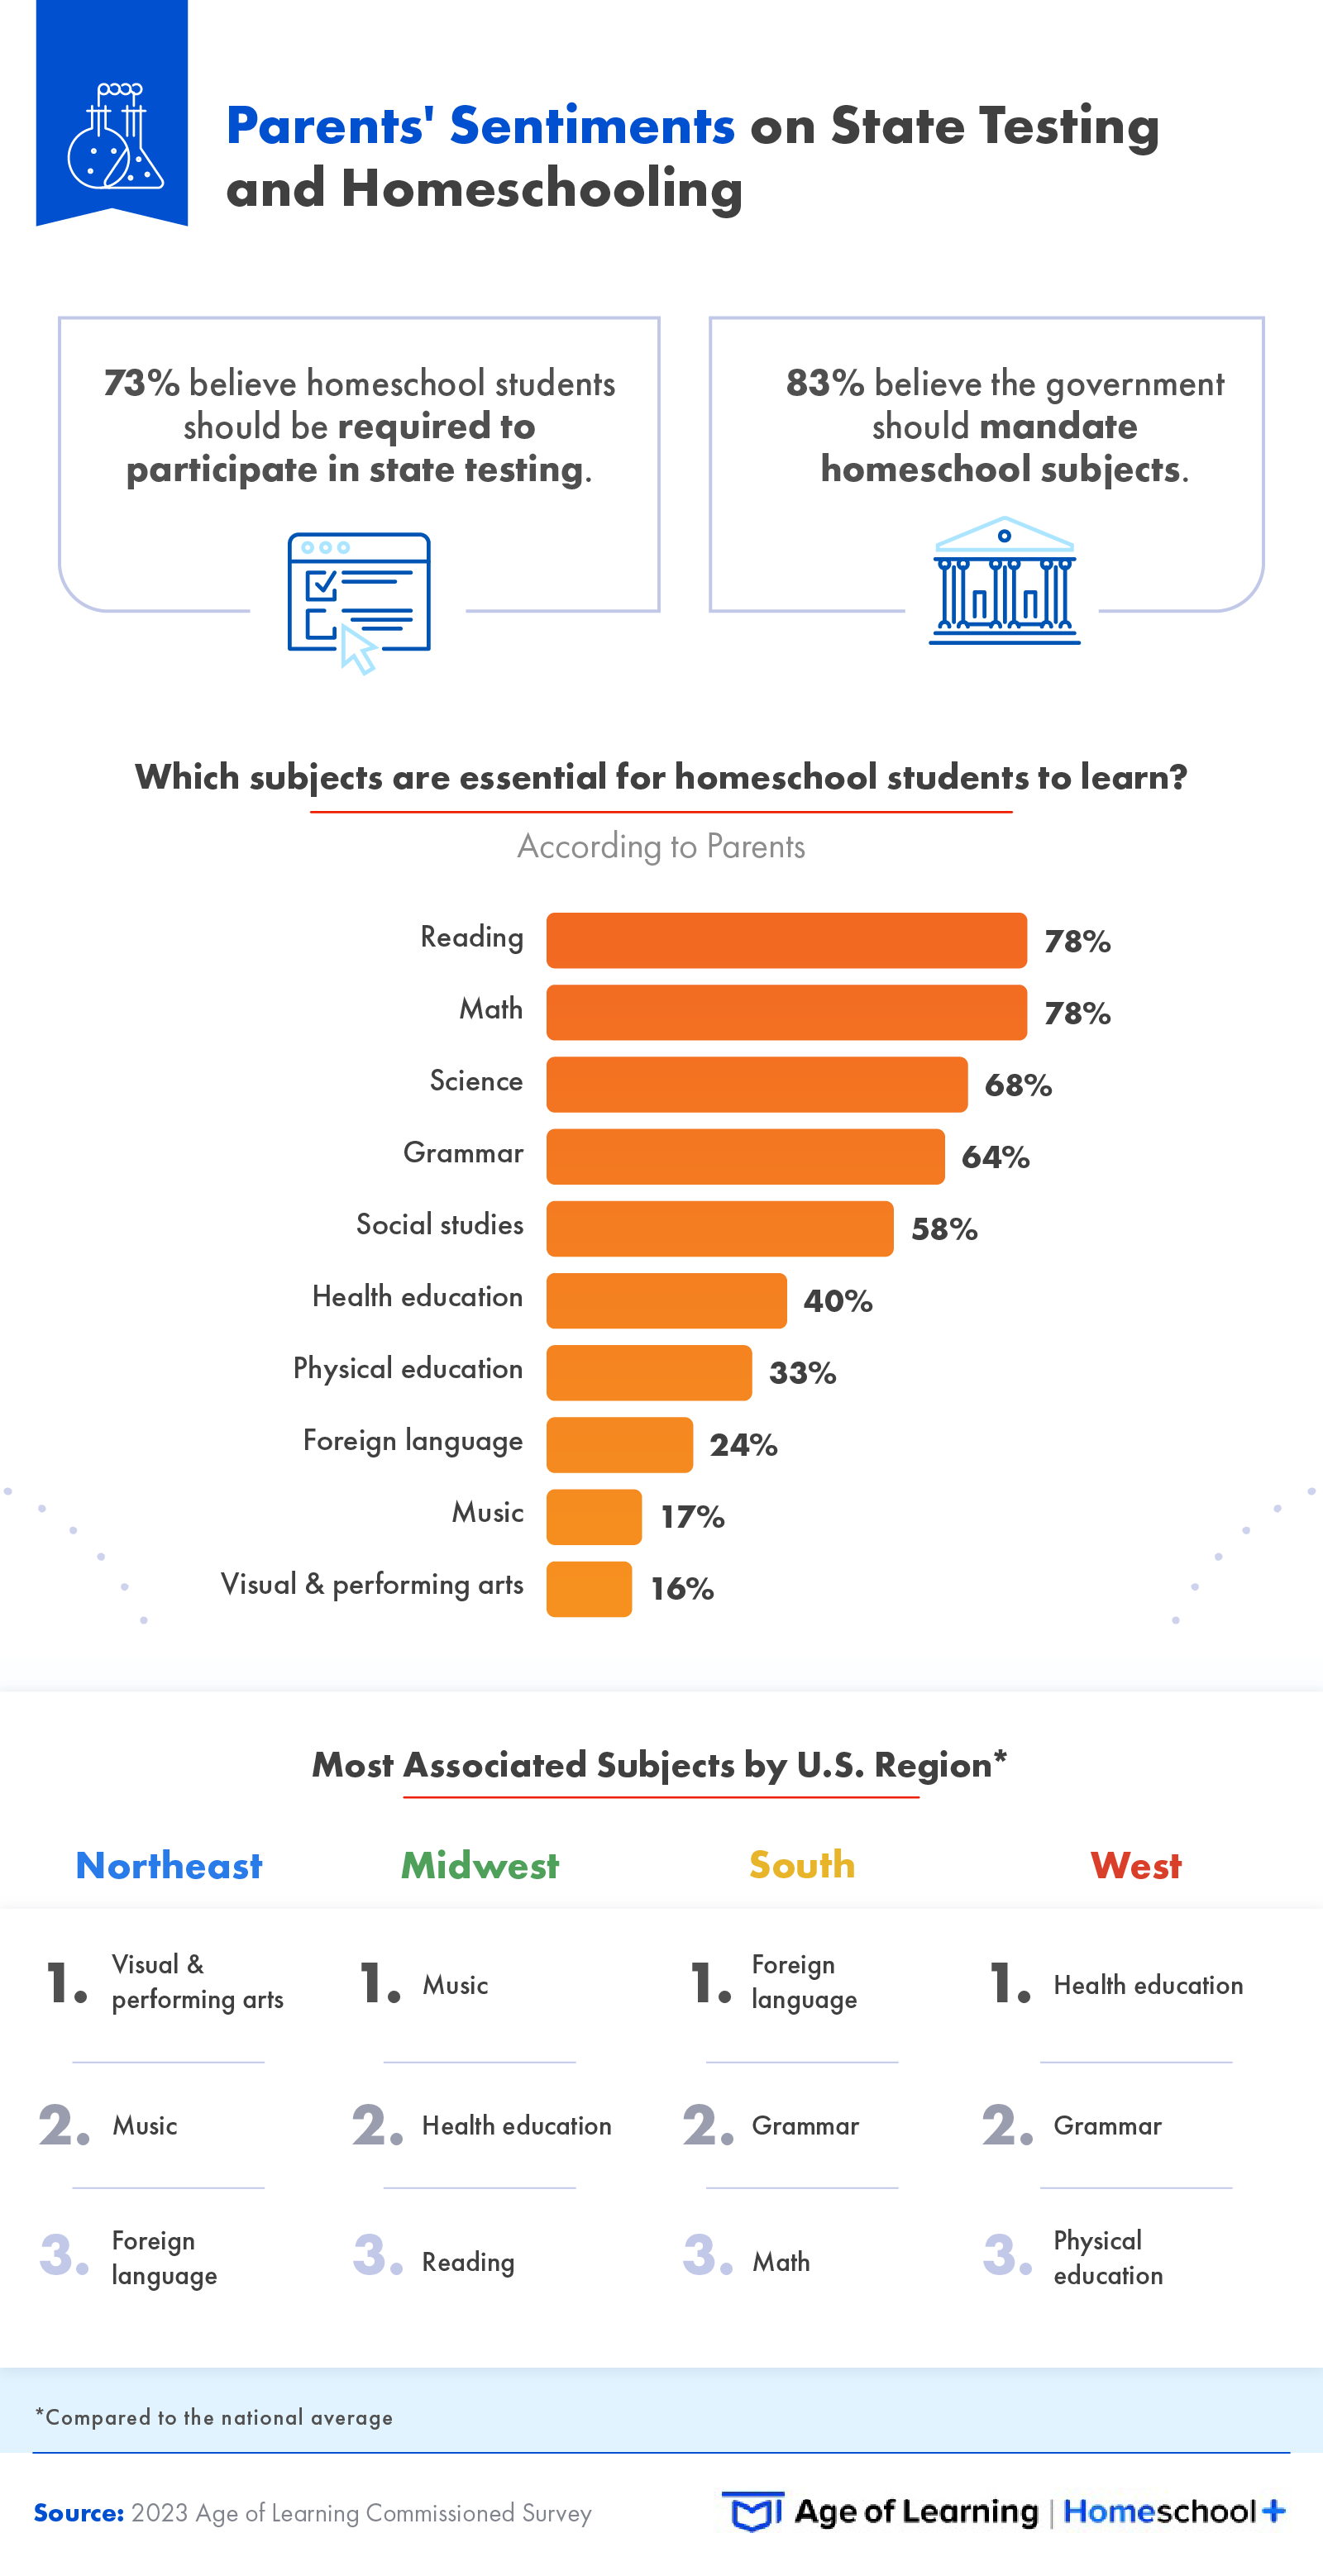 This infographic explores parents' sentiments on state testing and homeschooling.